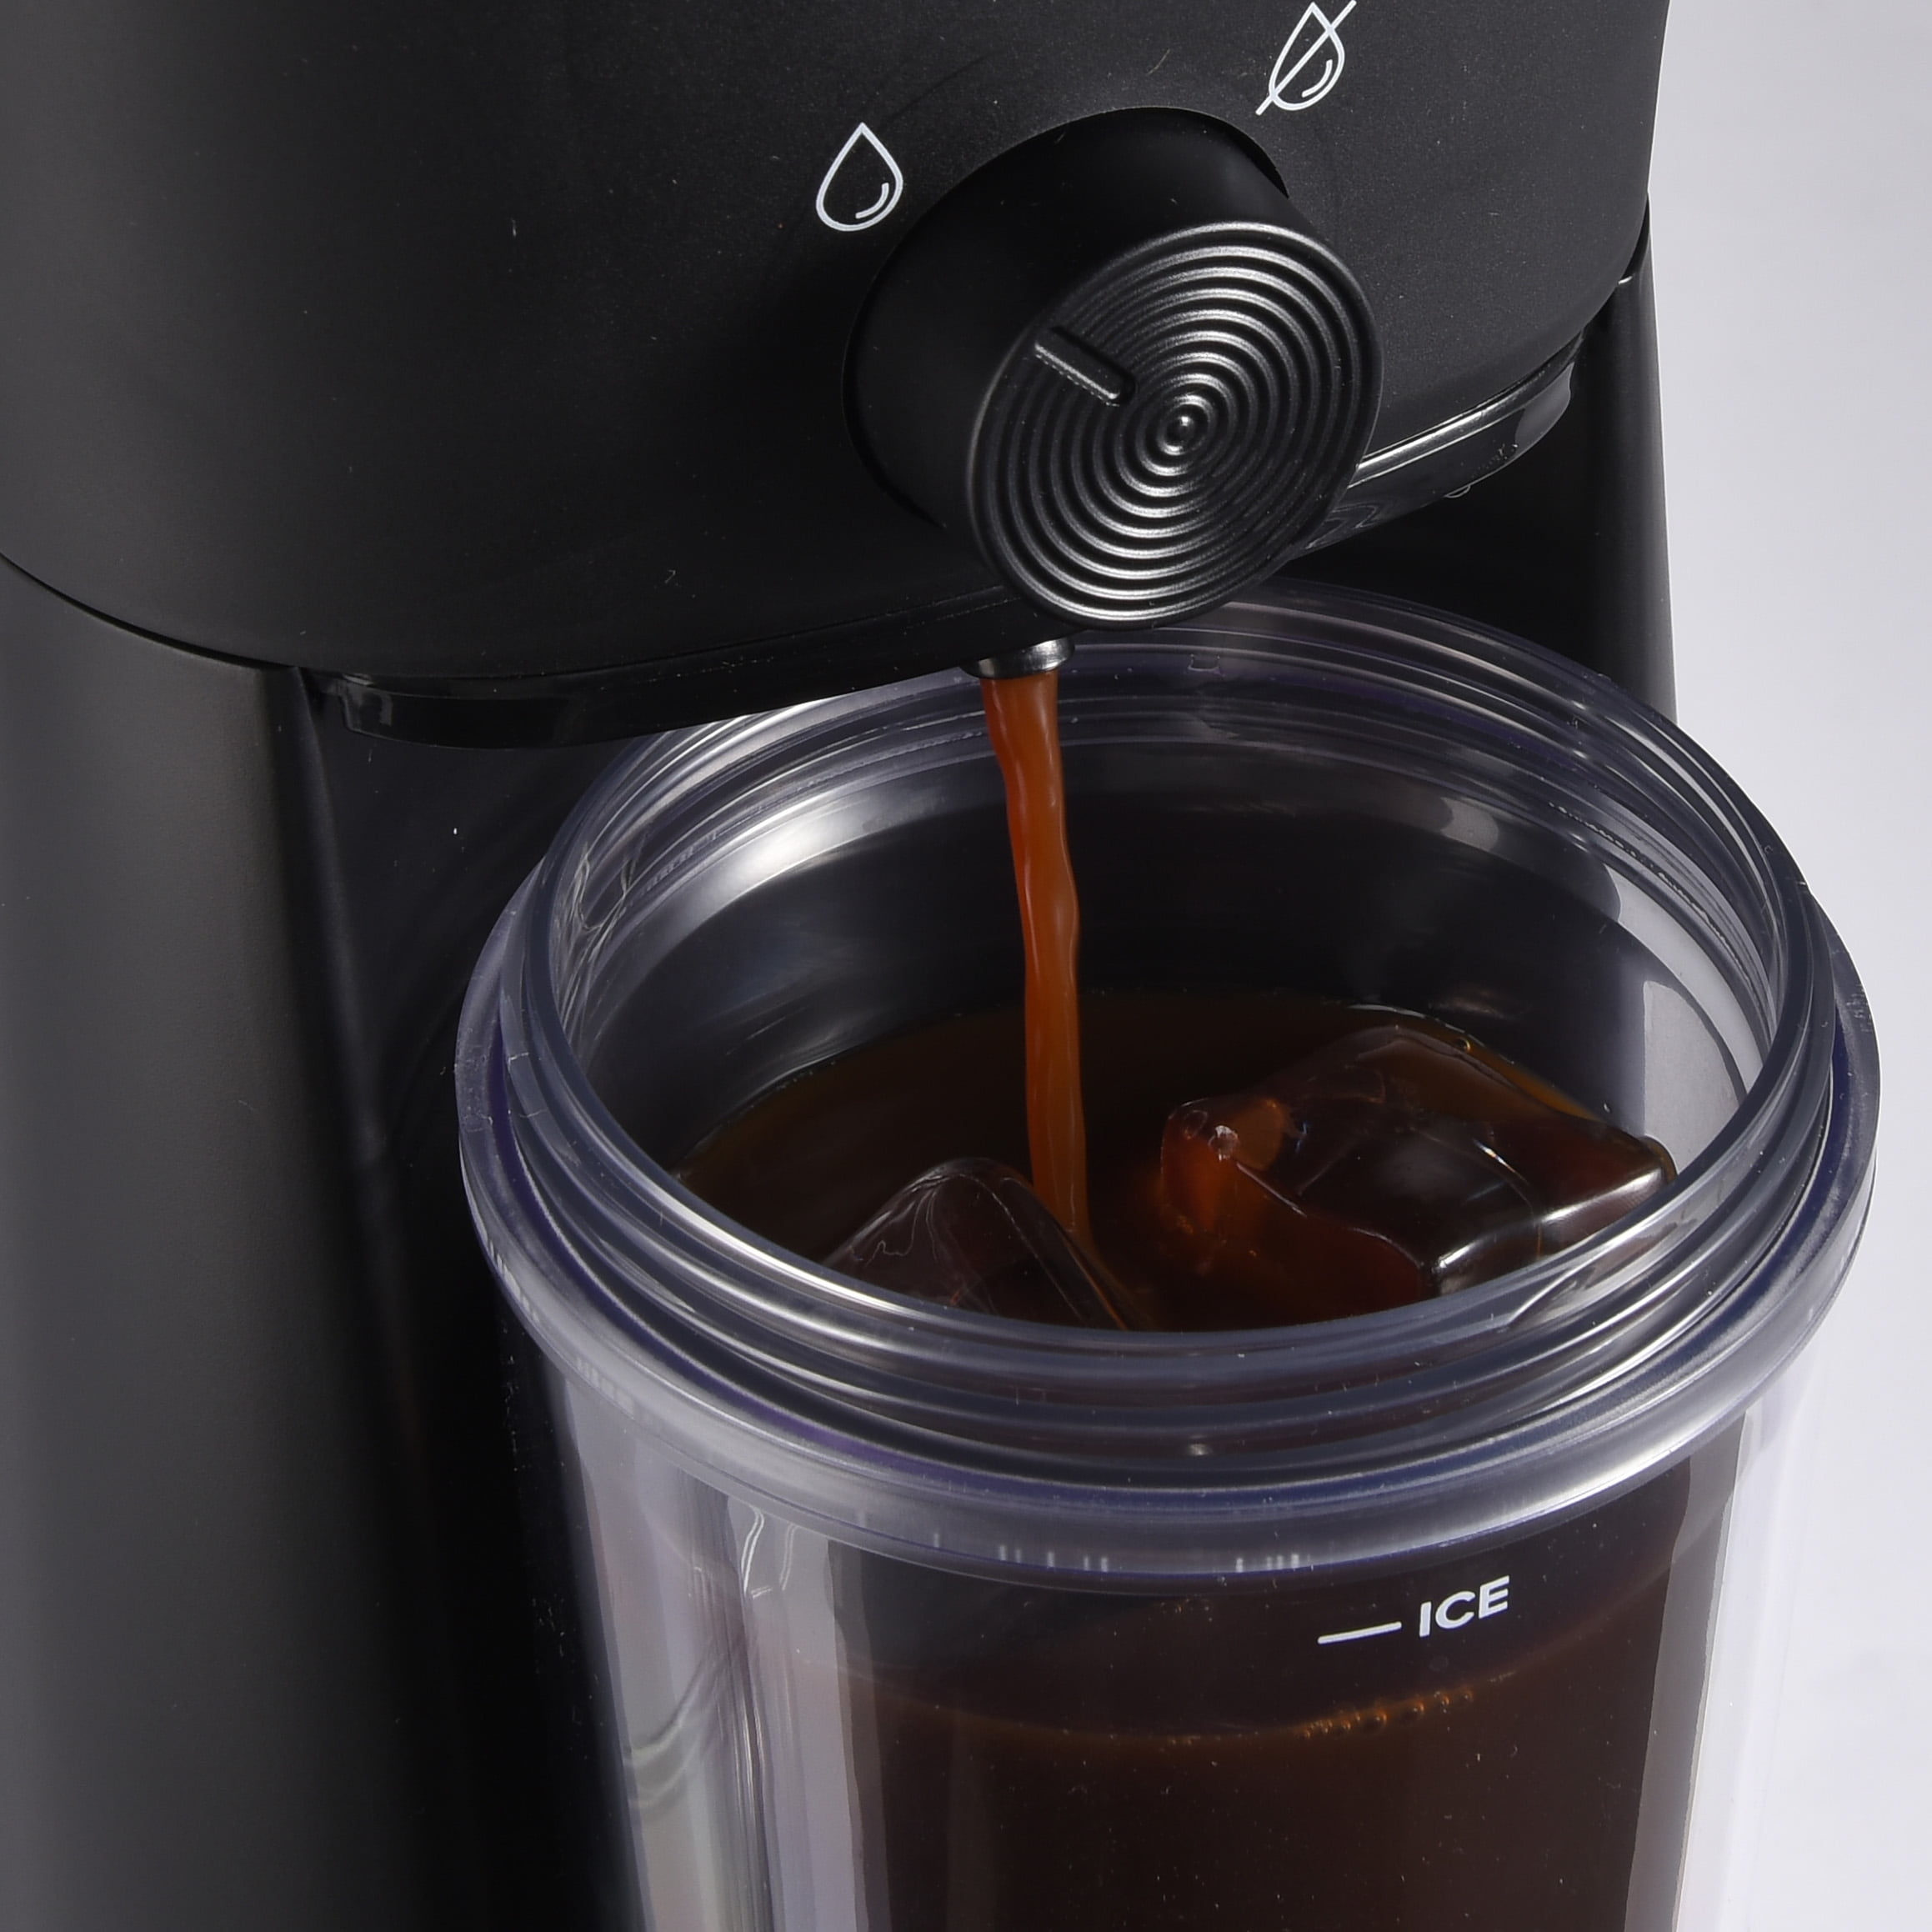 ONE MUG BREWERS Mobicold 1.0 Electric Cold Brew Coffee Maker – Premium Iced  Coffee Maker and Tea Maker, Cold brew in 15 minutes, Easy to Use and Clean,  Family Size – Upto 800 ml